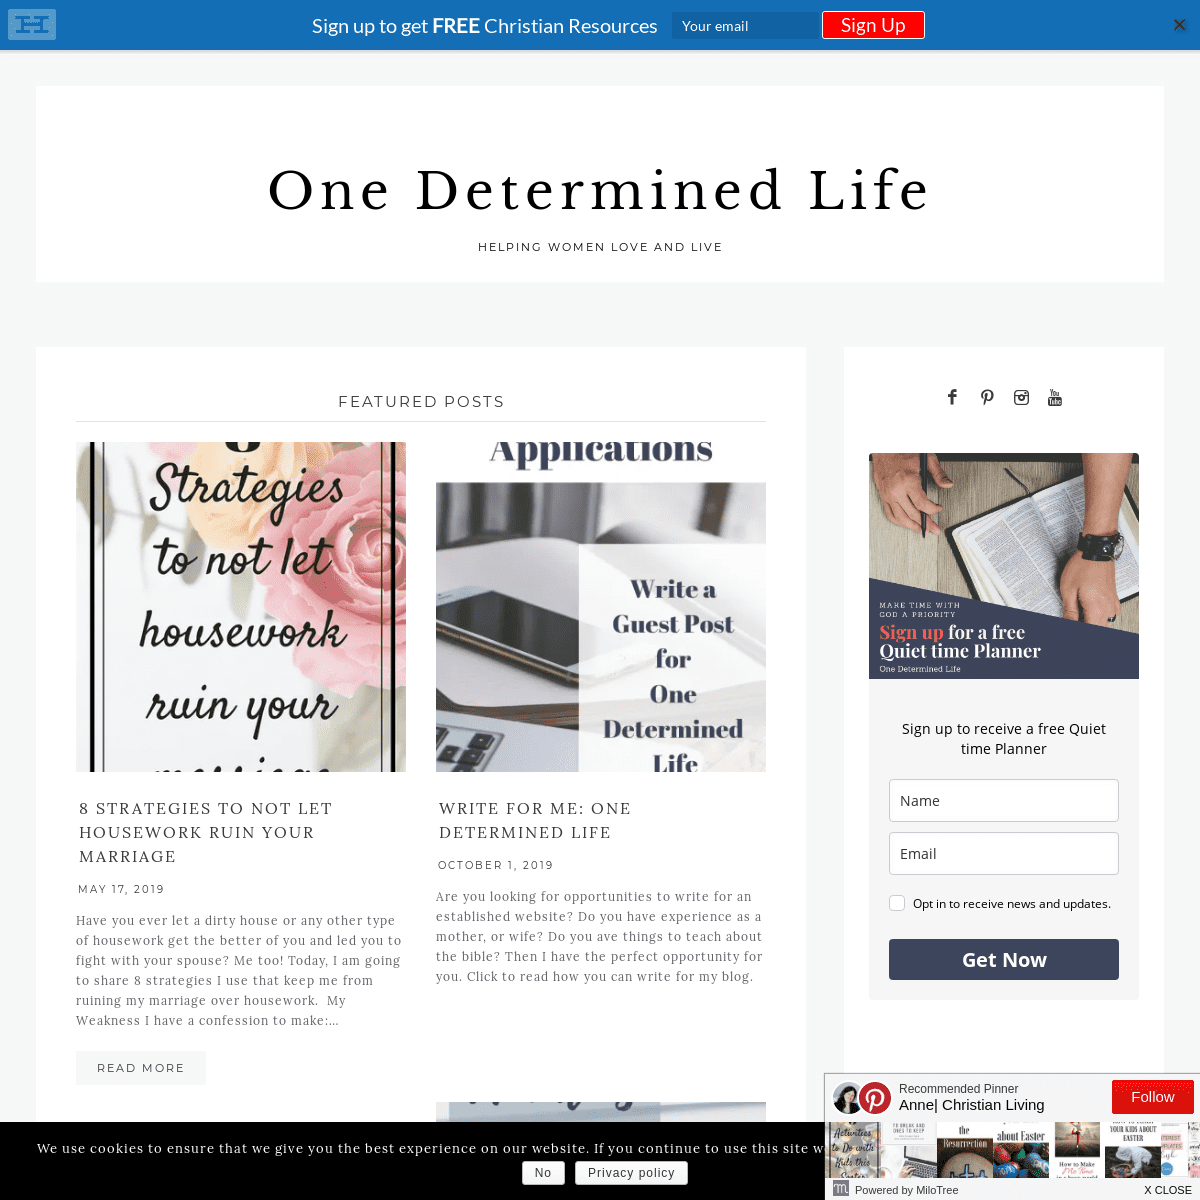 A complete backup of onedeterminedlife.com